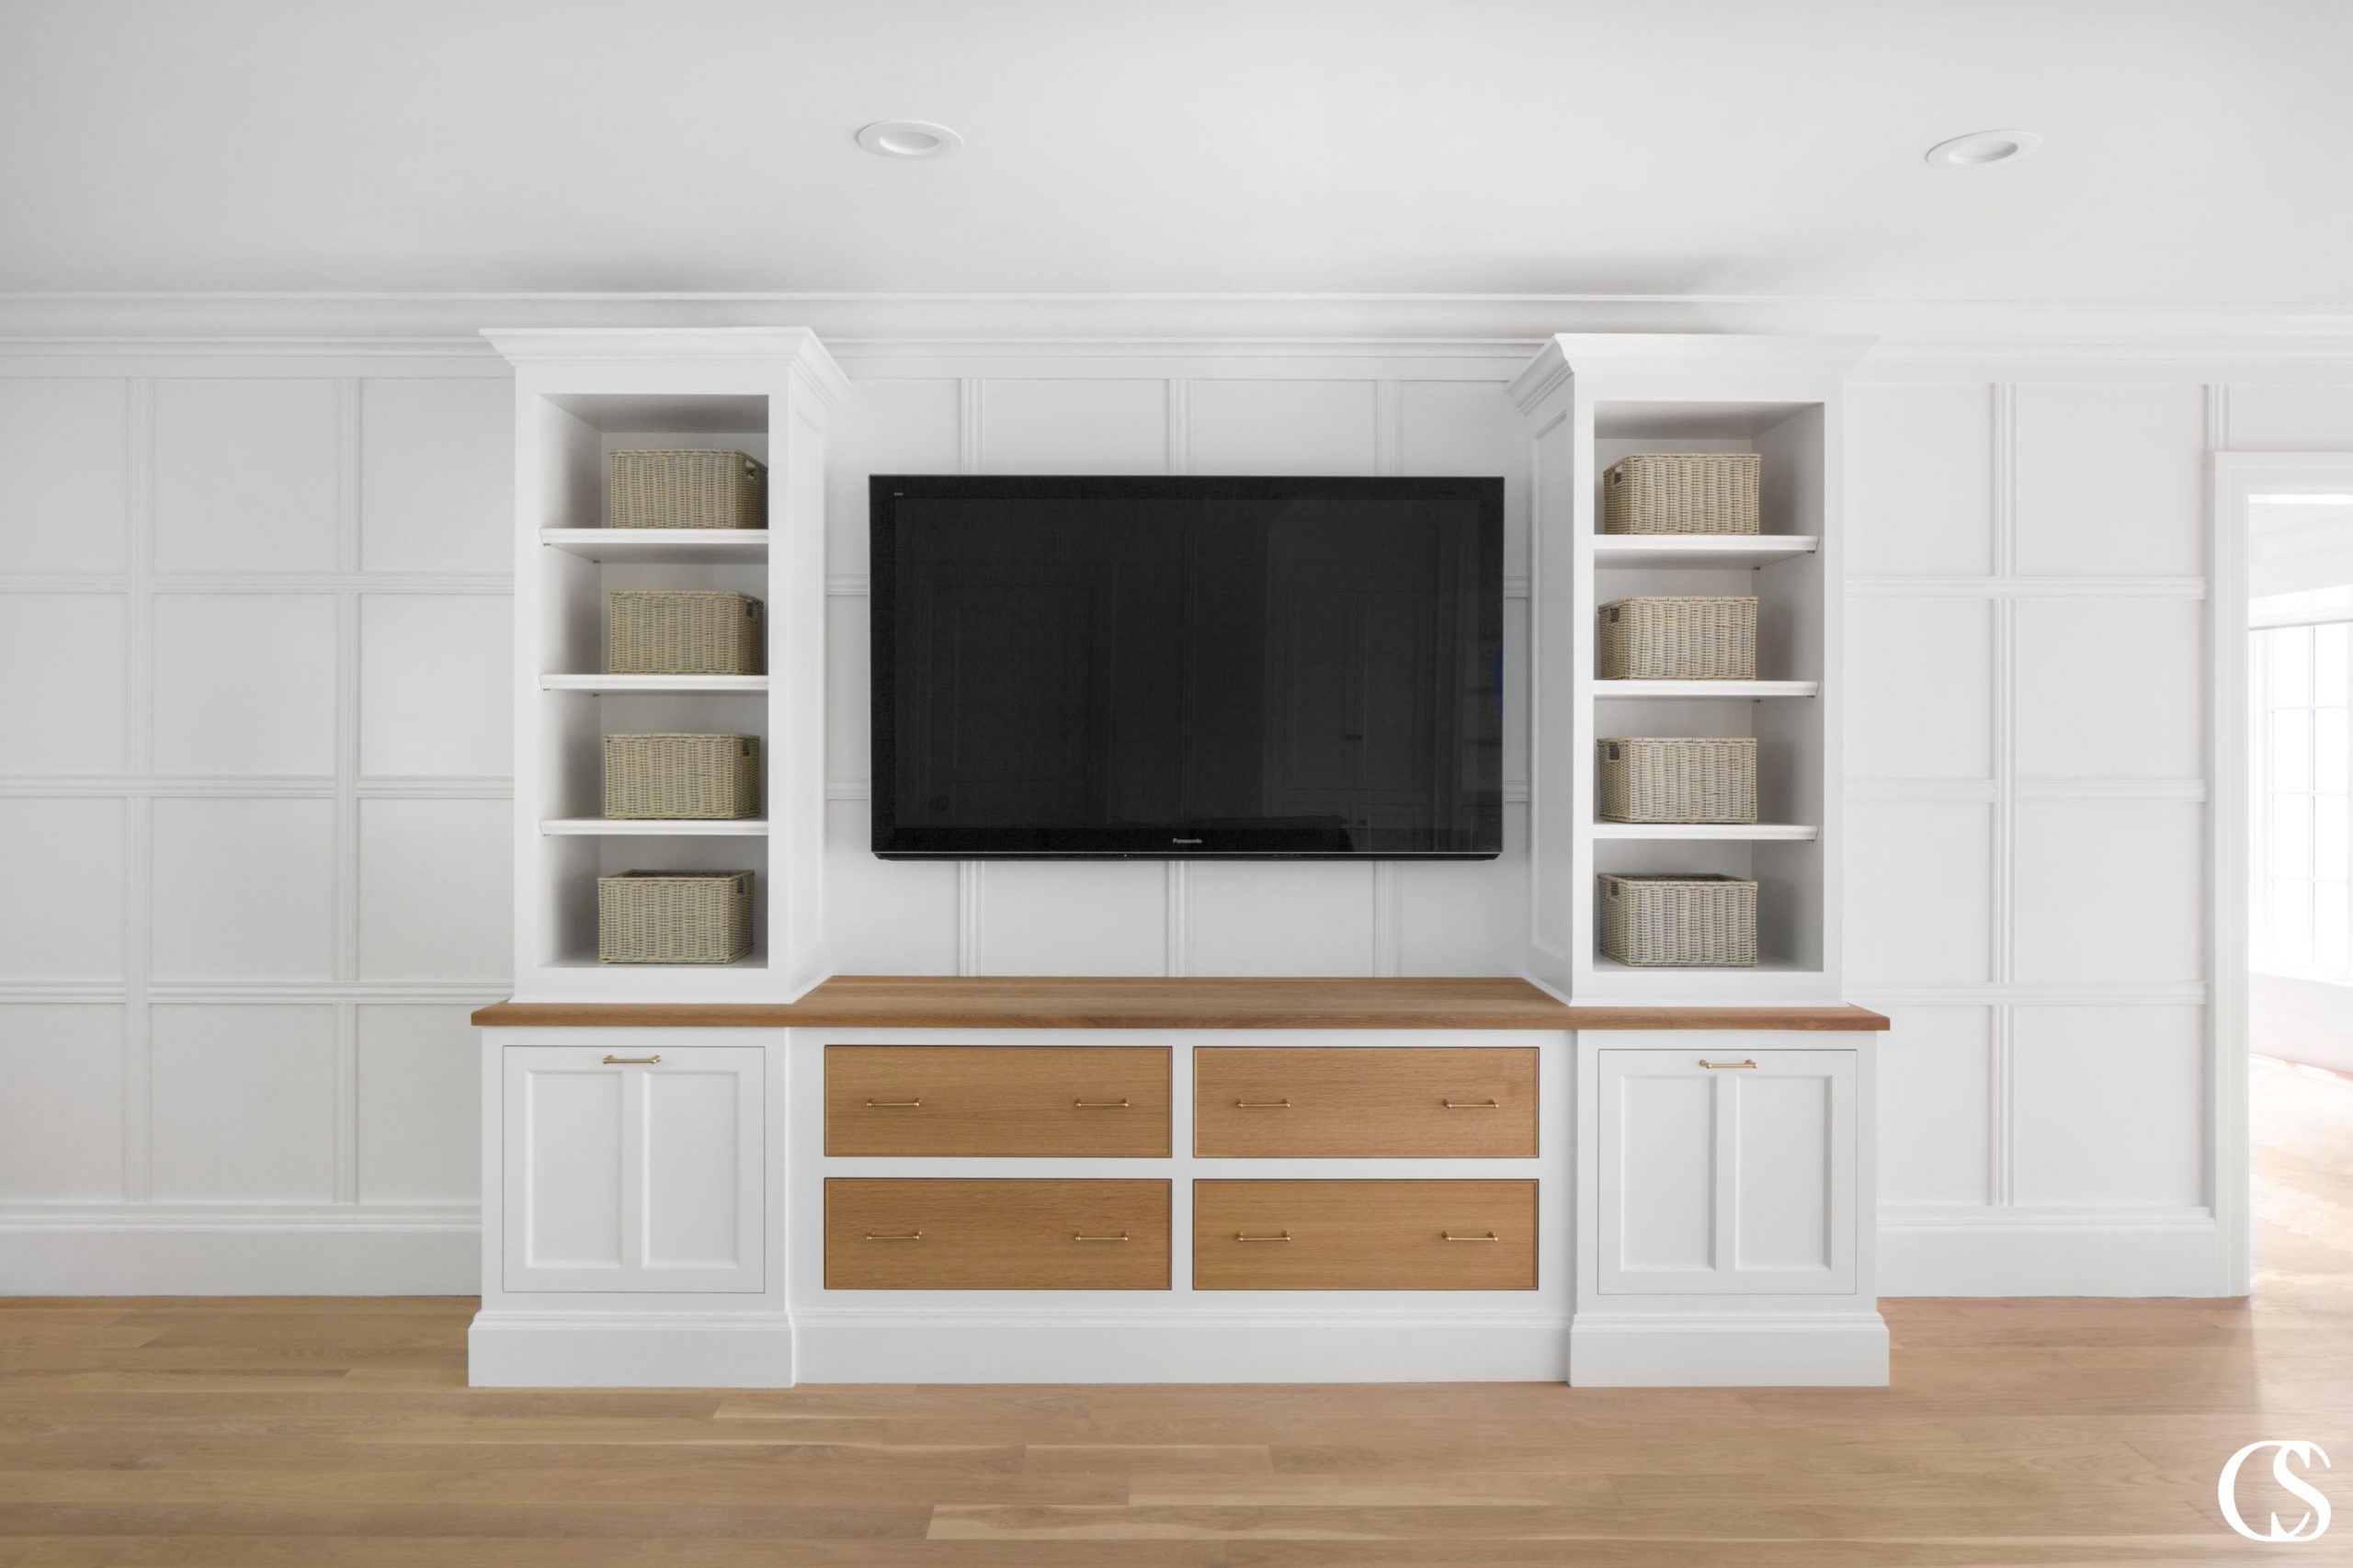 Open shelving is the perfect way to bring lightness to a big entertainment center, but it doesn't mean everything has to be on display. For more of our best custom built in design ideas, check out ChristopherScottCabinetry.com!